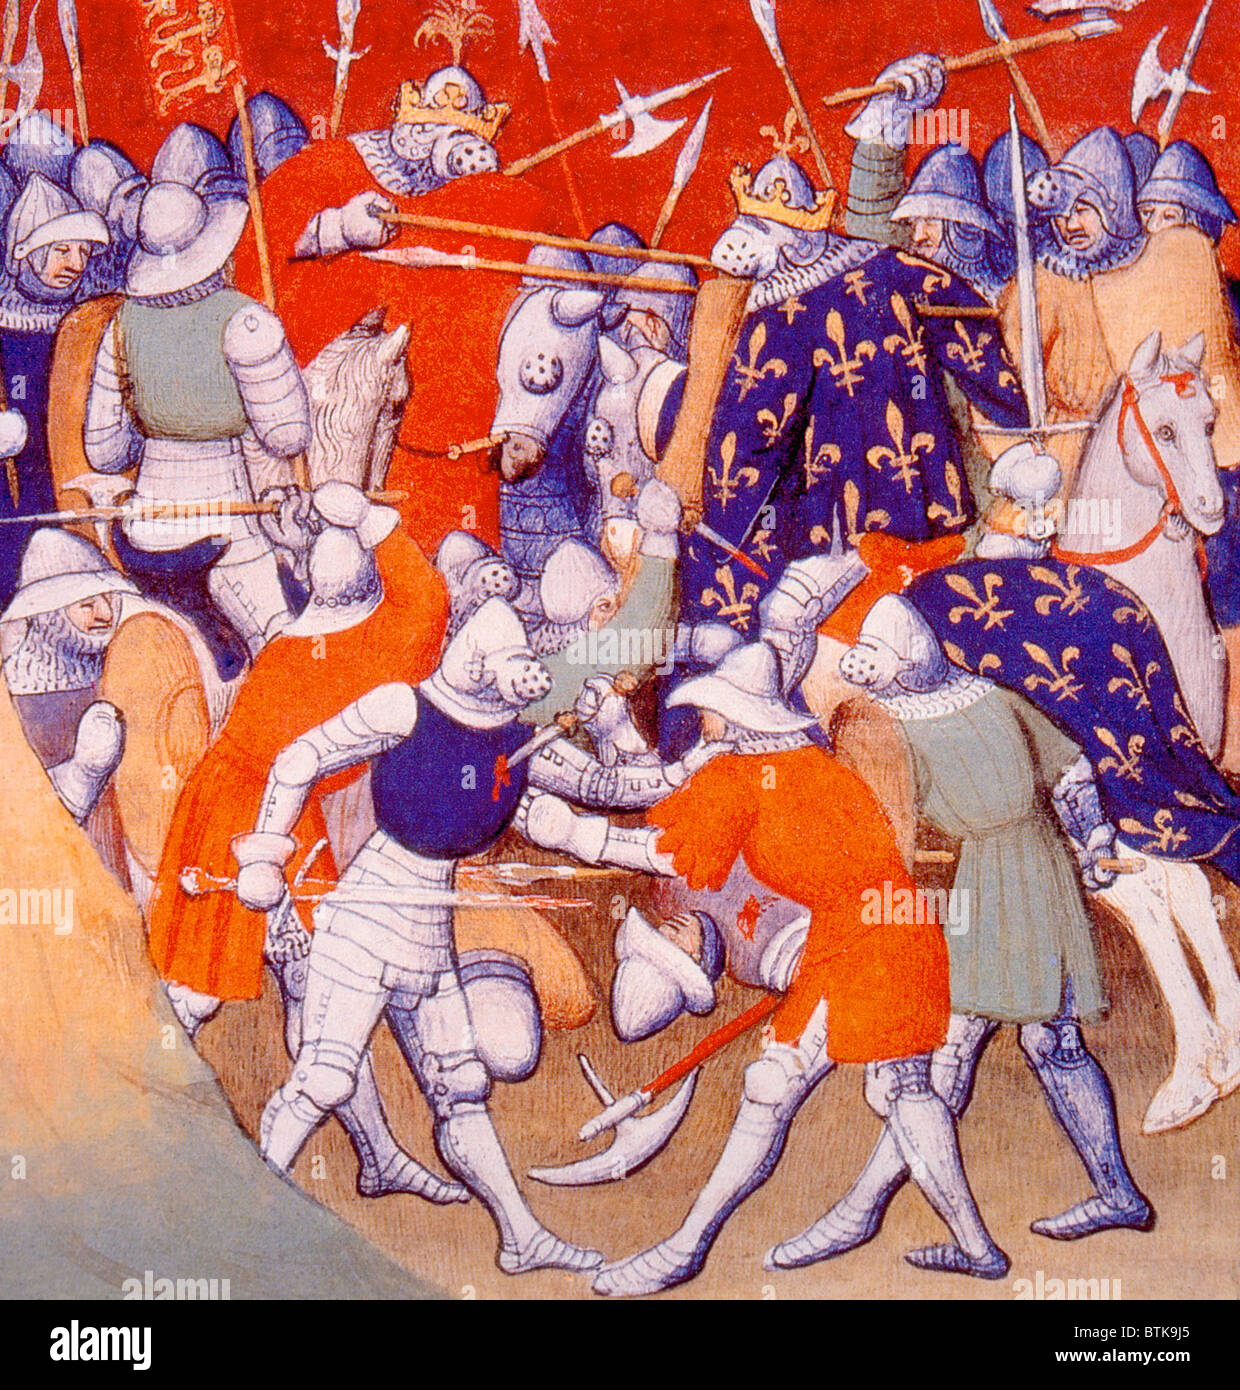 The Battle of Poitiers, Edward the Black Prince defeats and captures John II of France and his son, Philip the Bold of Burgundy, 1356 Stock Photo